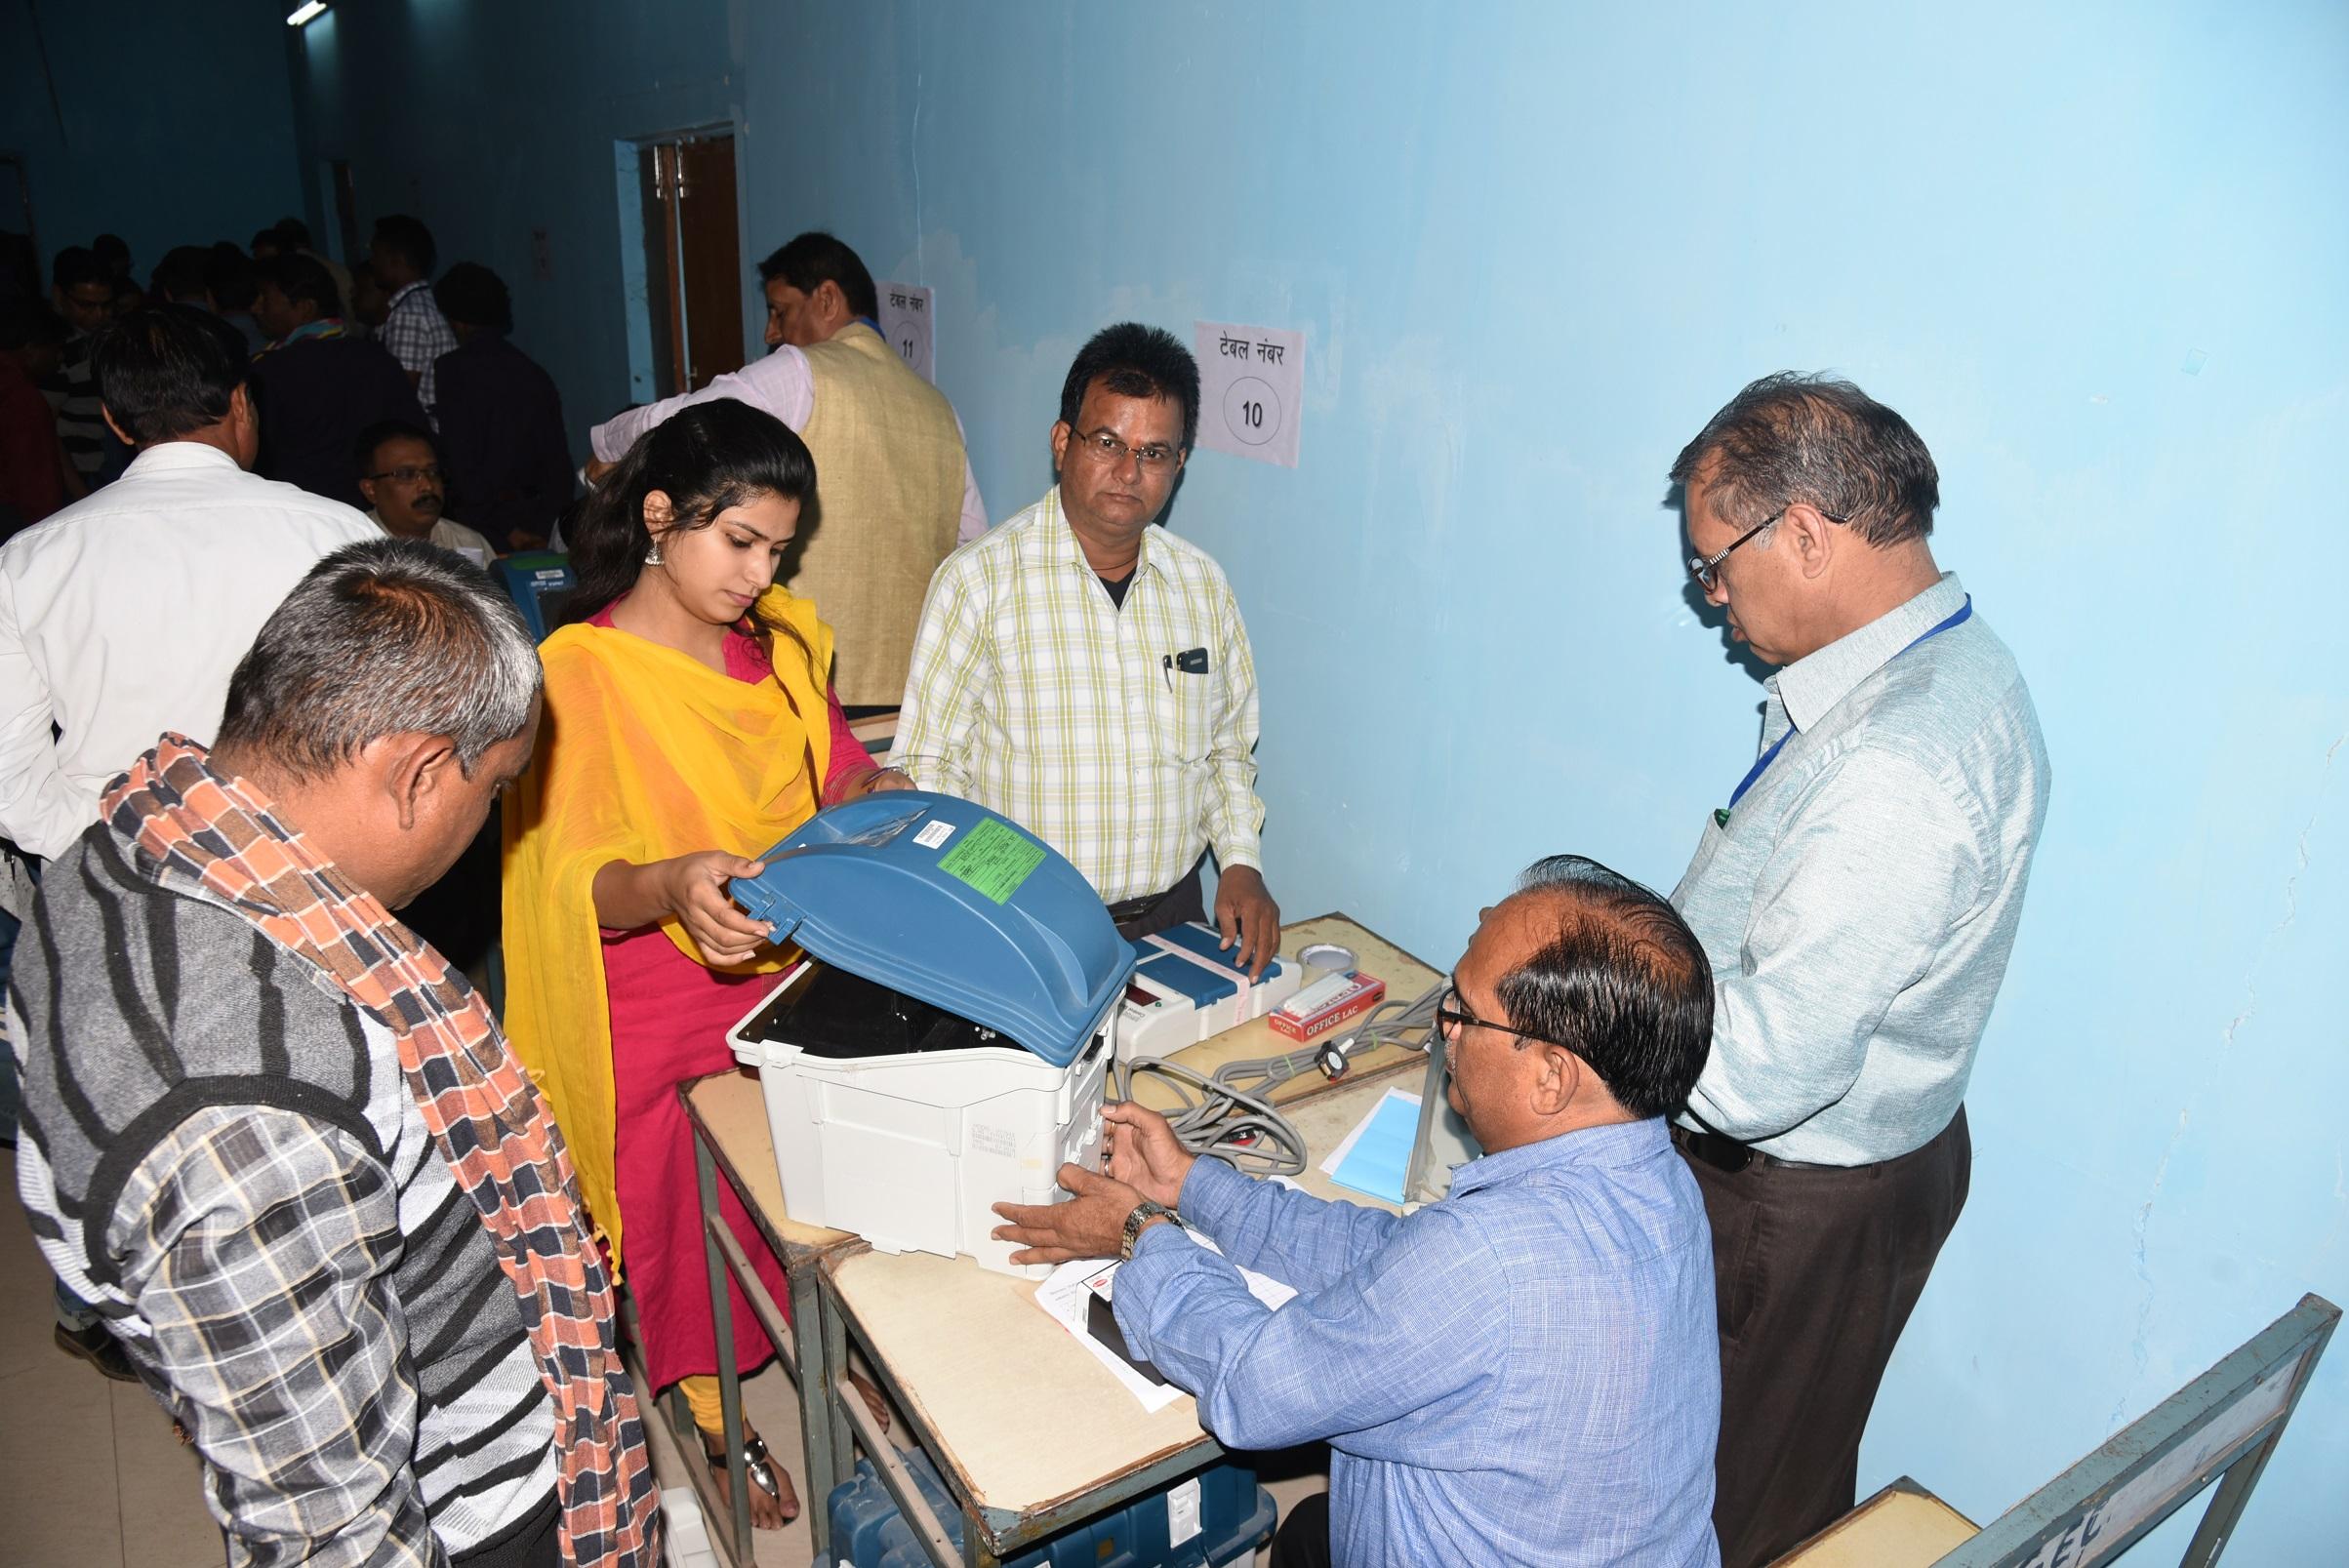 Commissioning process of EVM, Control unit and VVPAT begins